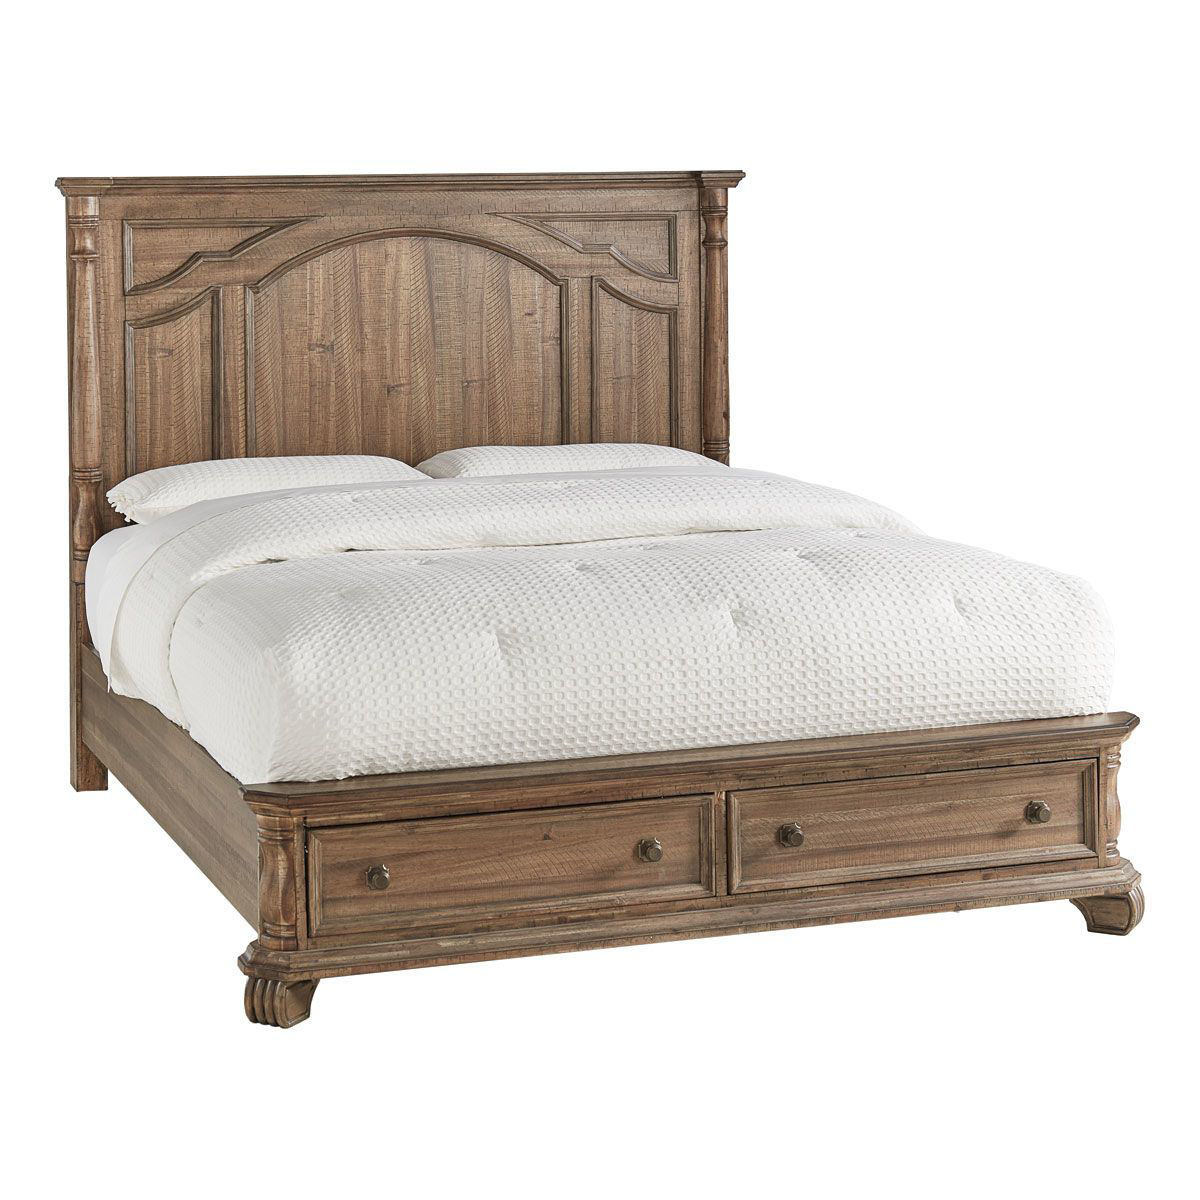 Hanover Complete Queen Storage Bed Badcock Home Furniture Andmore